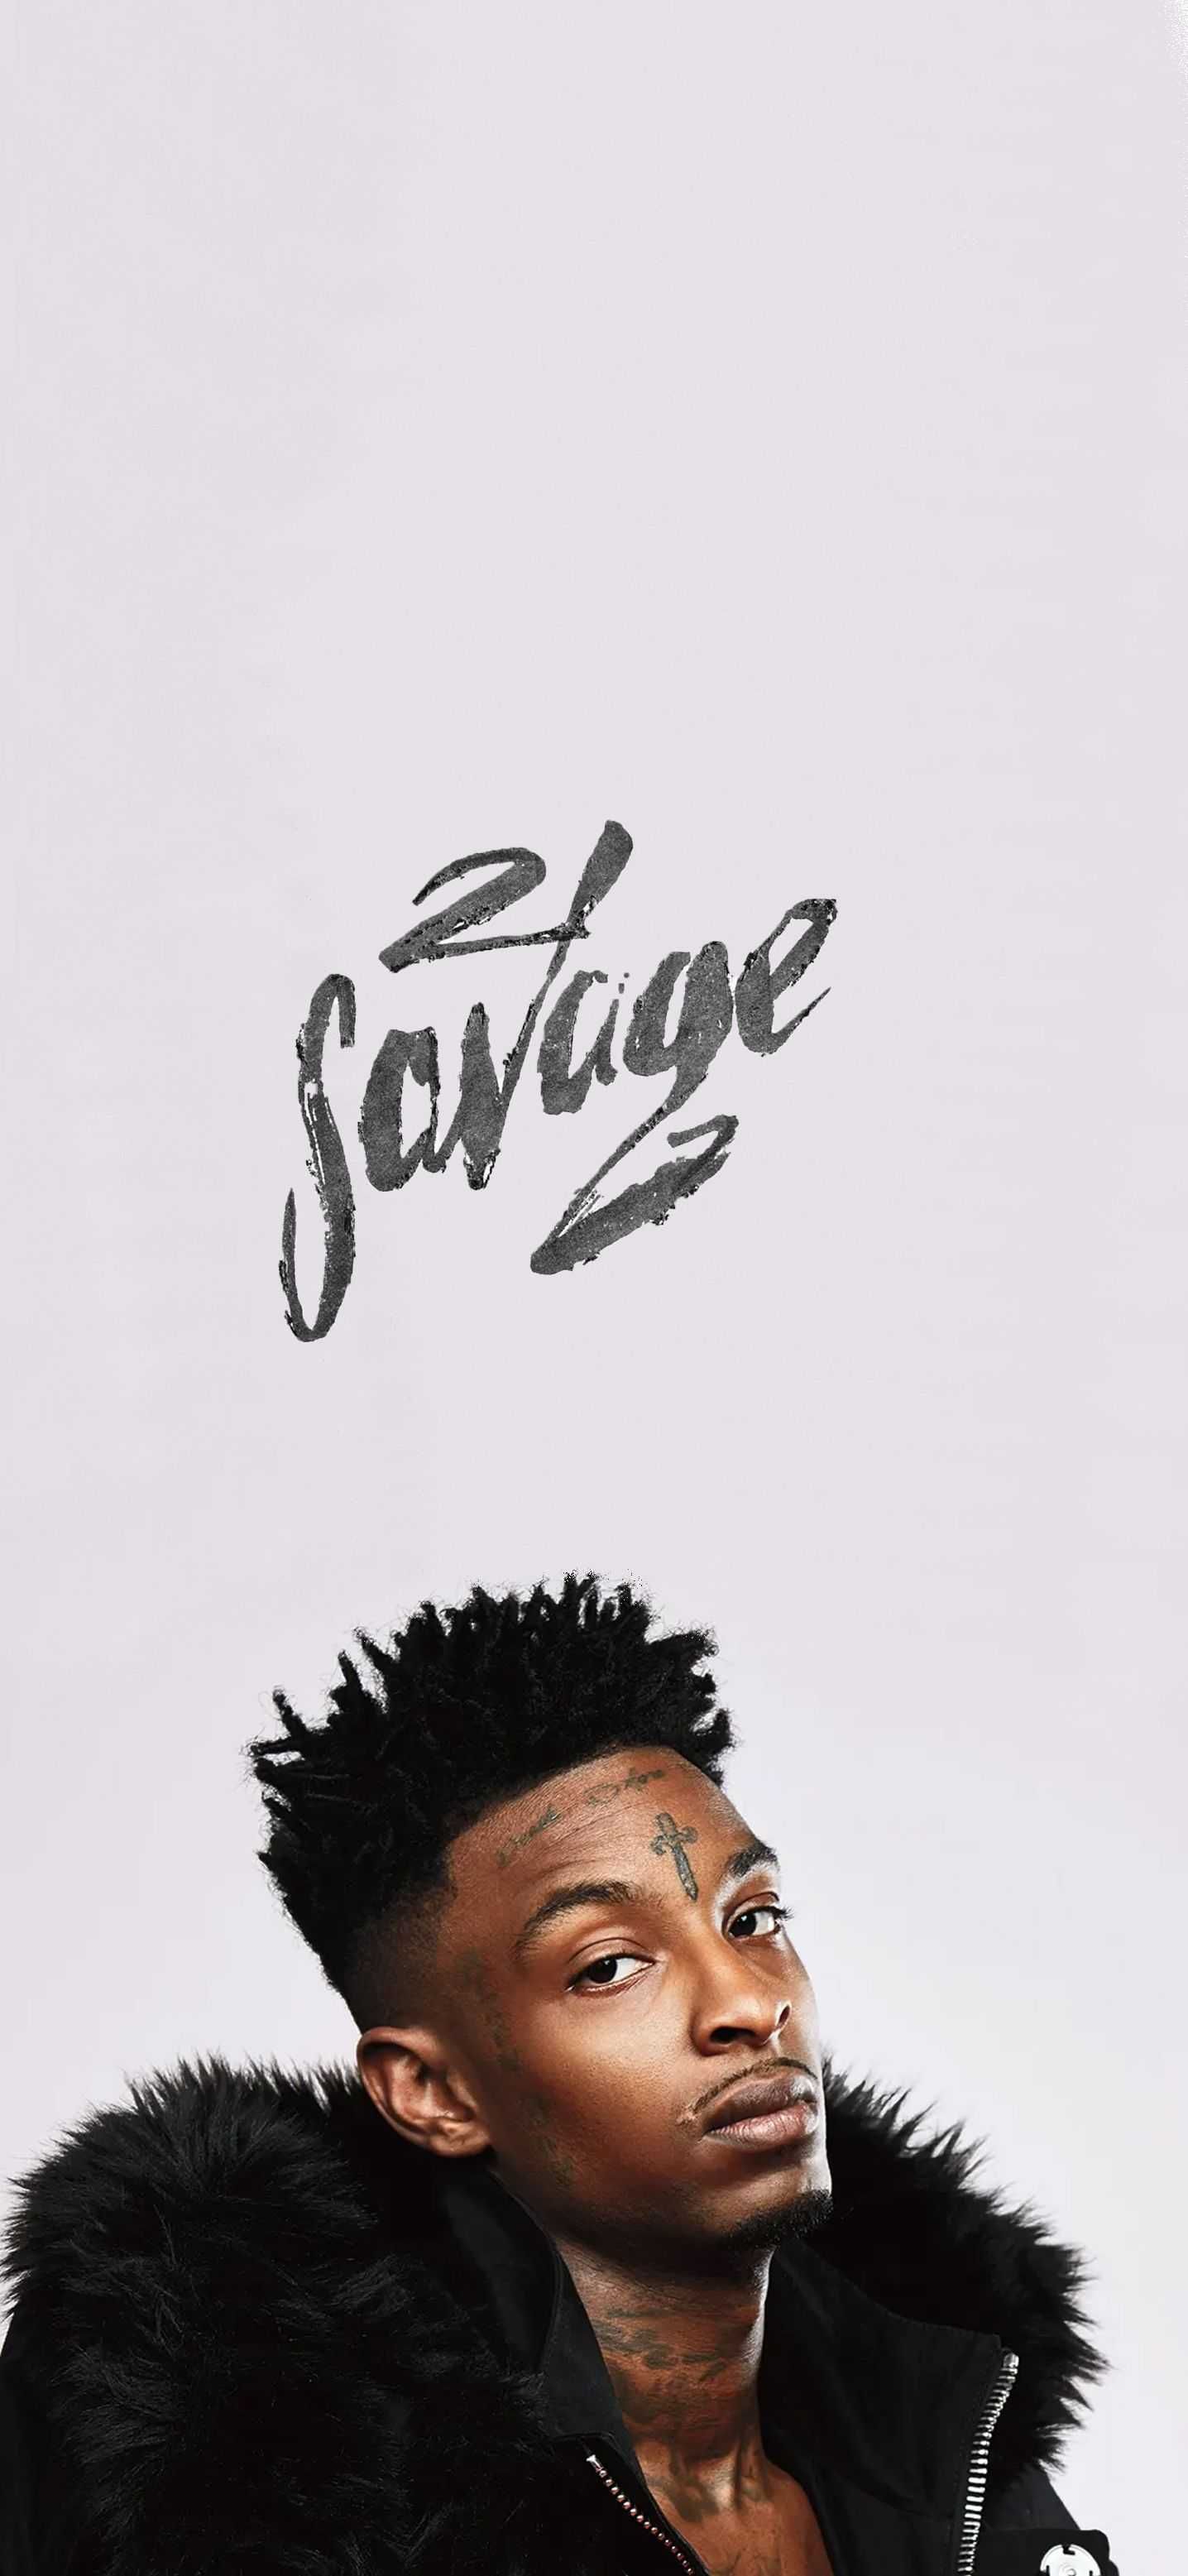 21 Savage Wallpaper Discover more animated, art, background, bank